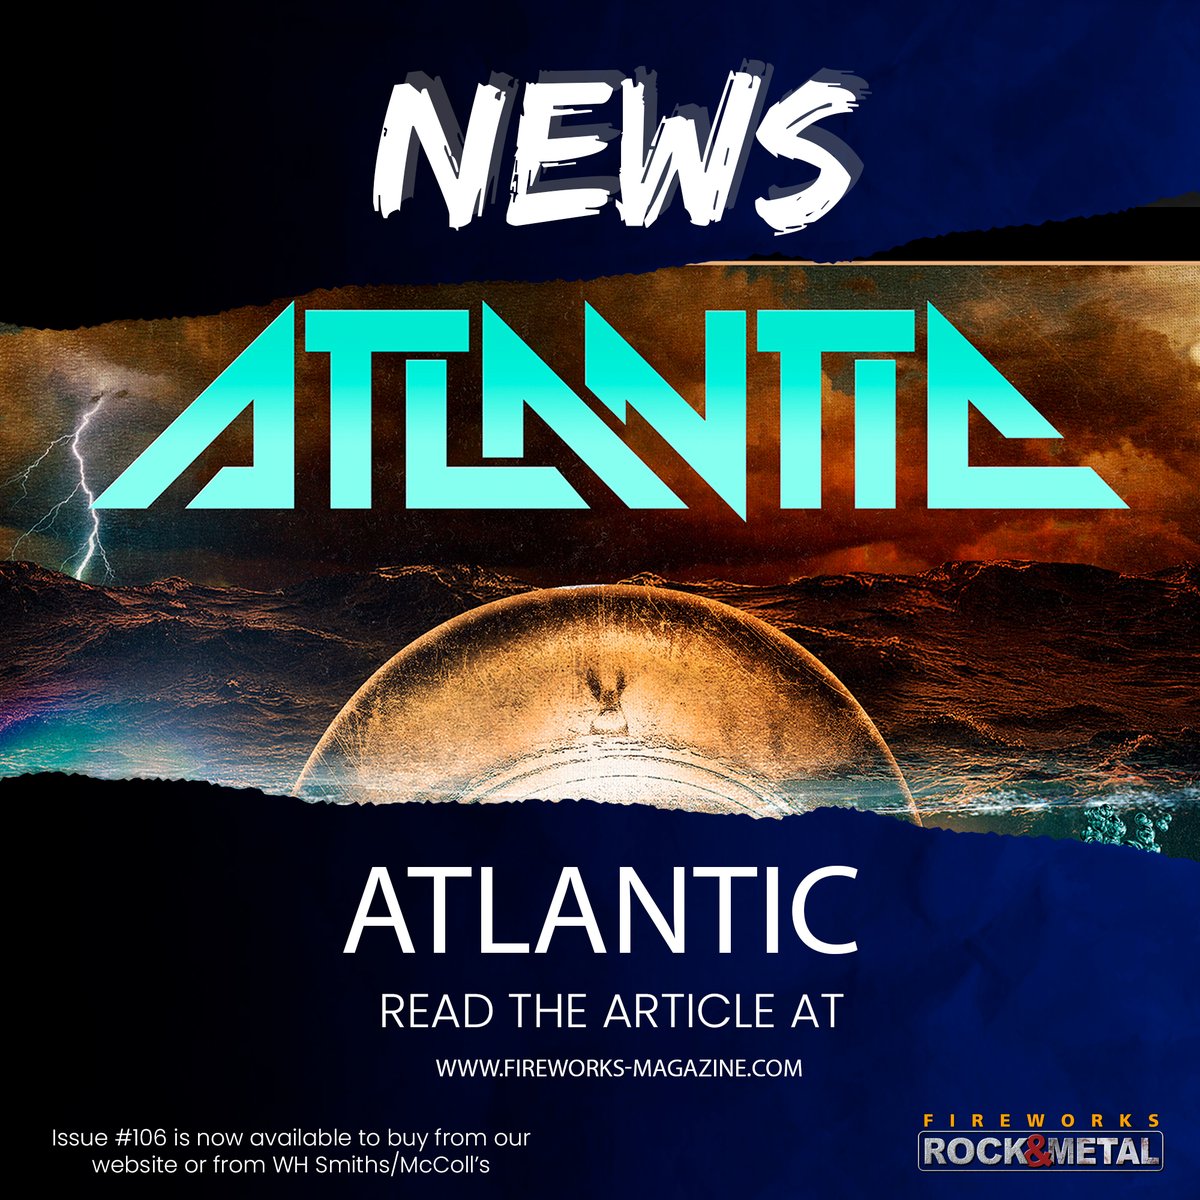 𝗘𝗫𝗖𝗘𝗟𝗟𝗘𝗡𝗧! Atlantic Announce Second Album “Another World 𝘙𝘦𝘢𝘥 𝘵𝘩𝘦 𝘢𝘳𝘵𝘪𝘤𝘭𝘦 𝘩𝘦𝘳𝘦: wix.to/y0tZuRN -- BUY Issue #106 from fireworks-magazine.com 𝙐𝙆 𝙎𝙪𝙗𝙨𝙘𝙧𝙞𝙥𝙩𝙞𝙤𝙣𝙨 𝙣𝙤𝙬 𝙟𝙪𝙨𝙩 £32.